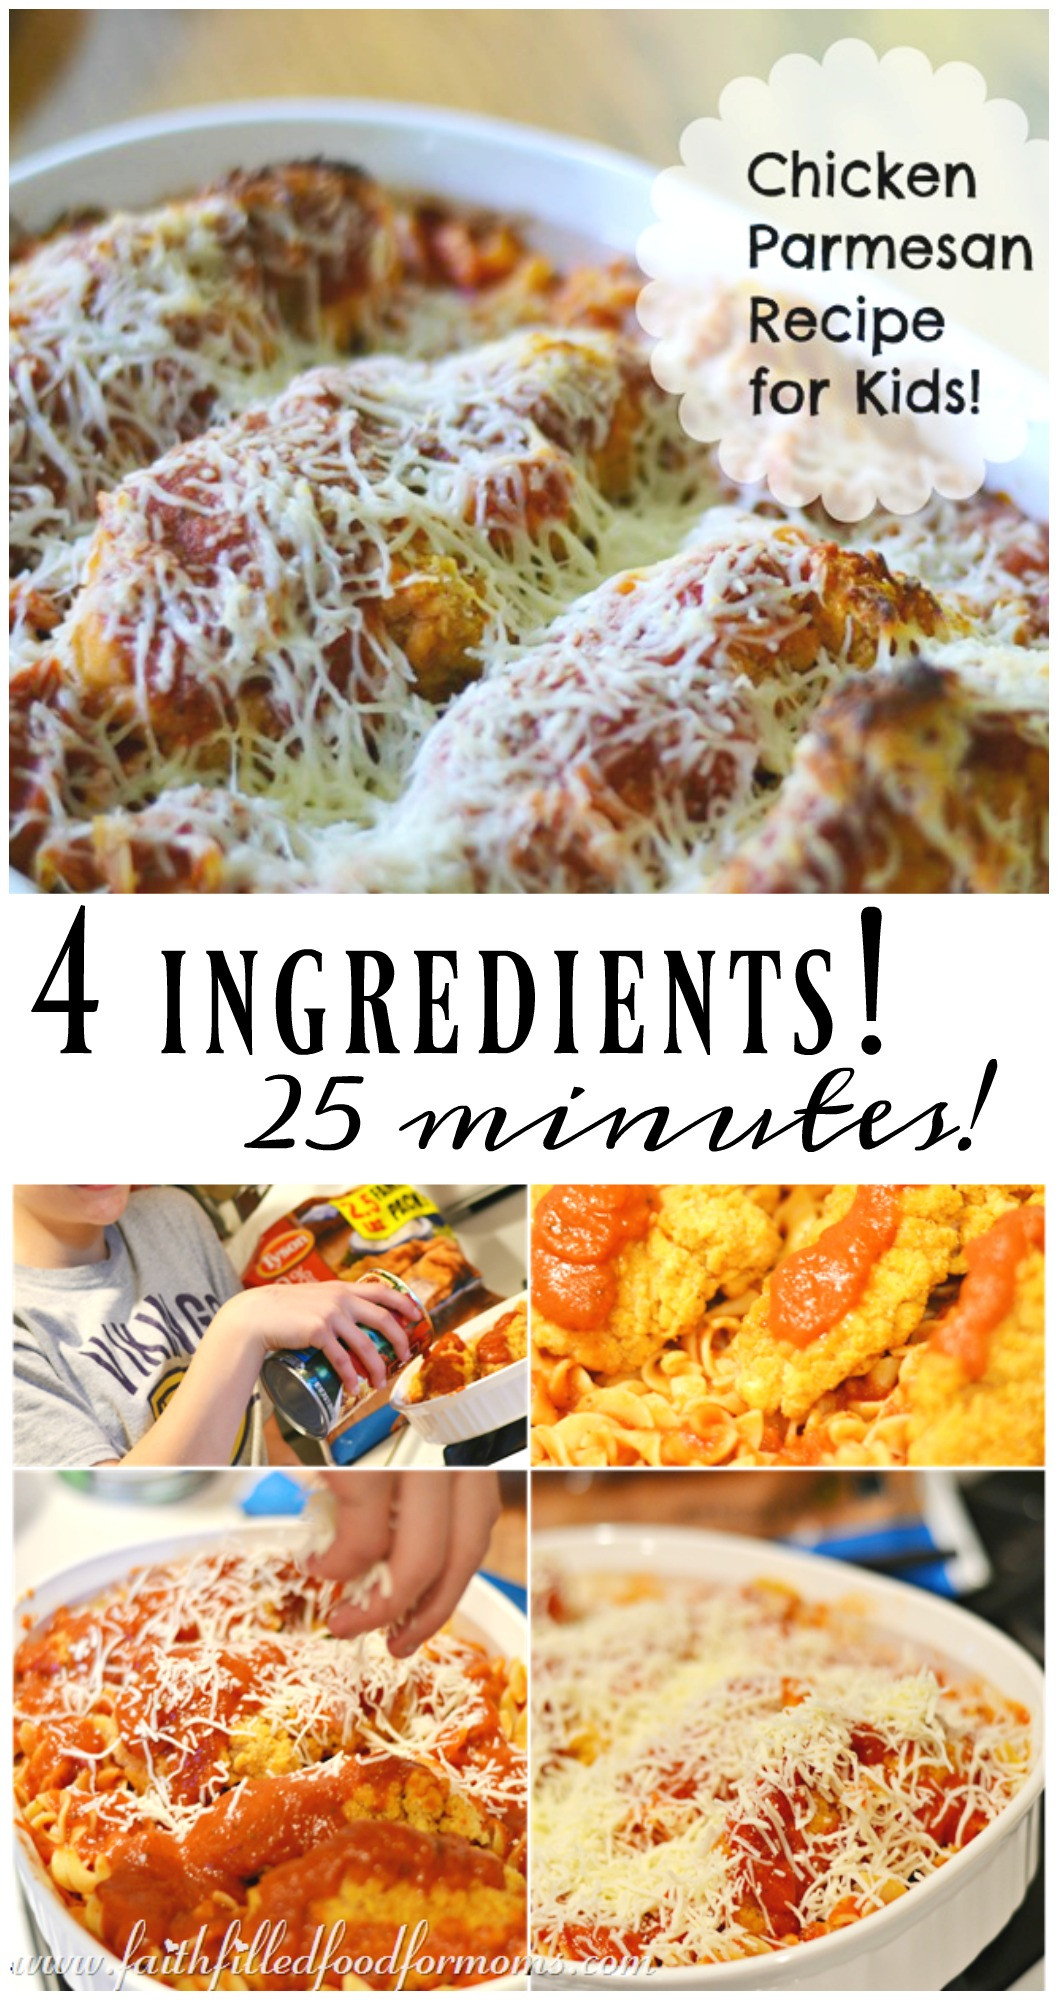 Chicken Recipes Kids Love
 Chicken Parmesan Recipe for Kids • Faith Filled Food for Moms